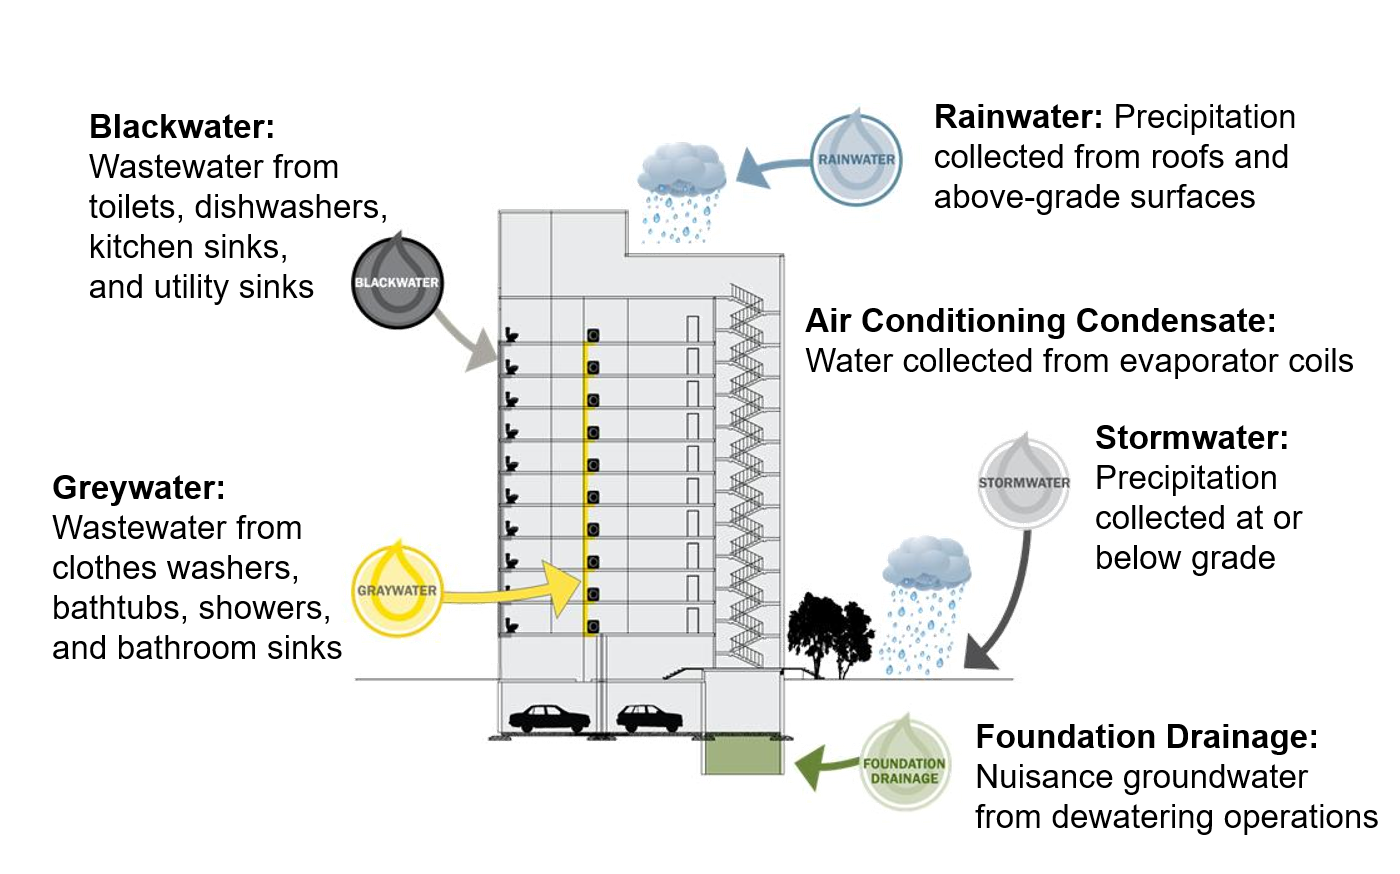 Greywater Recycling - An Untapped Water Resource Inside Buildings